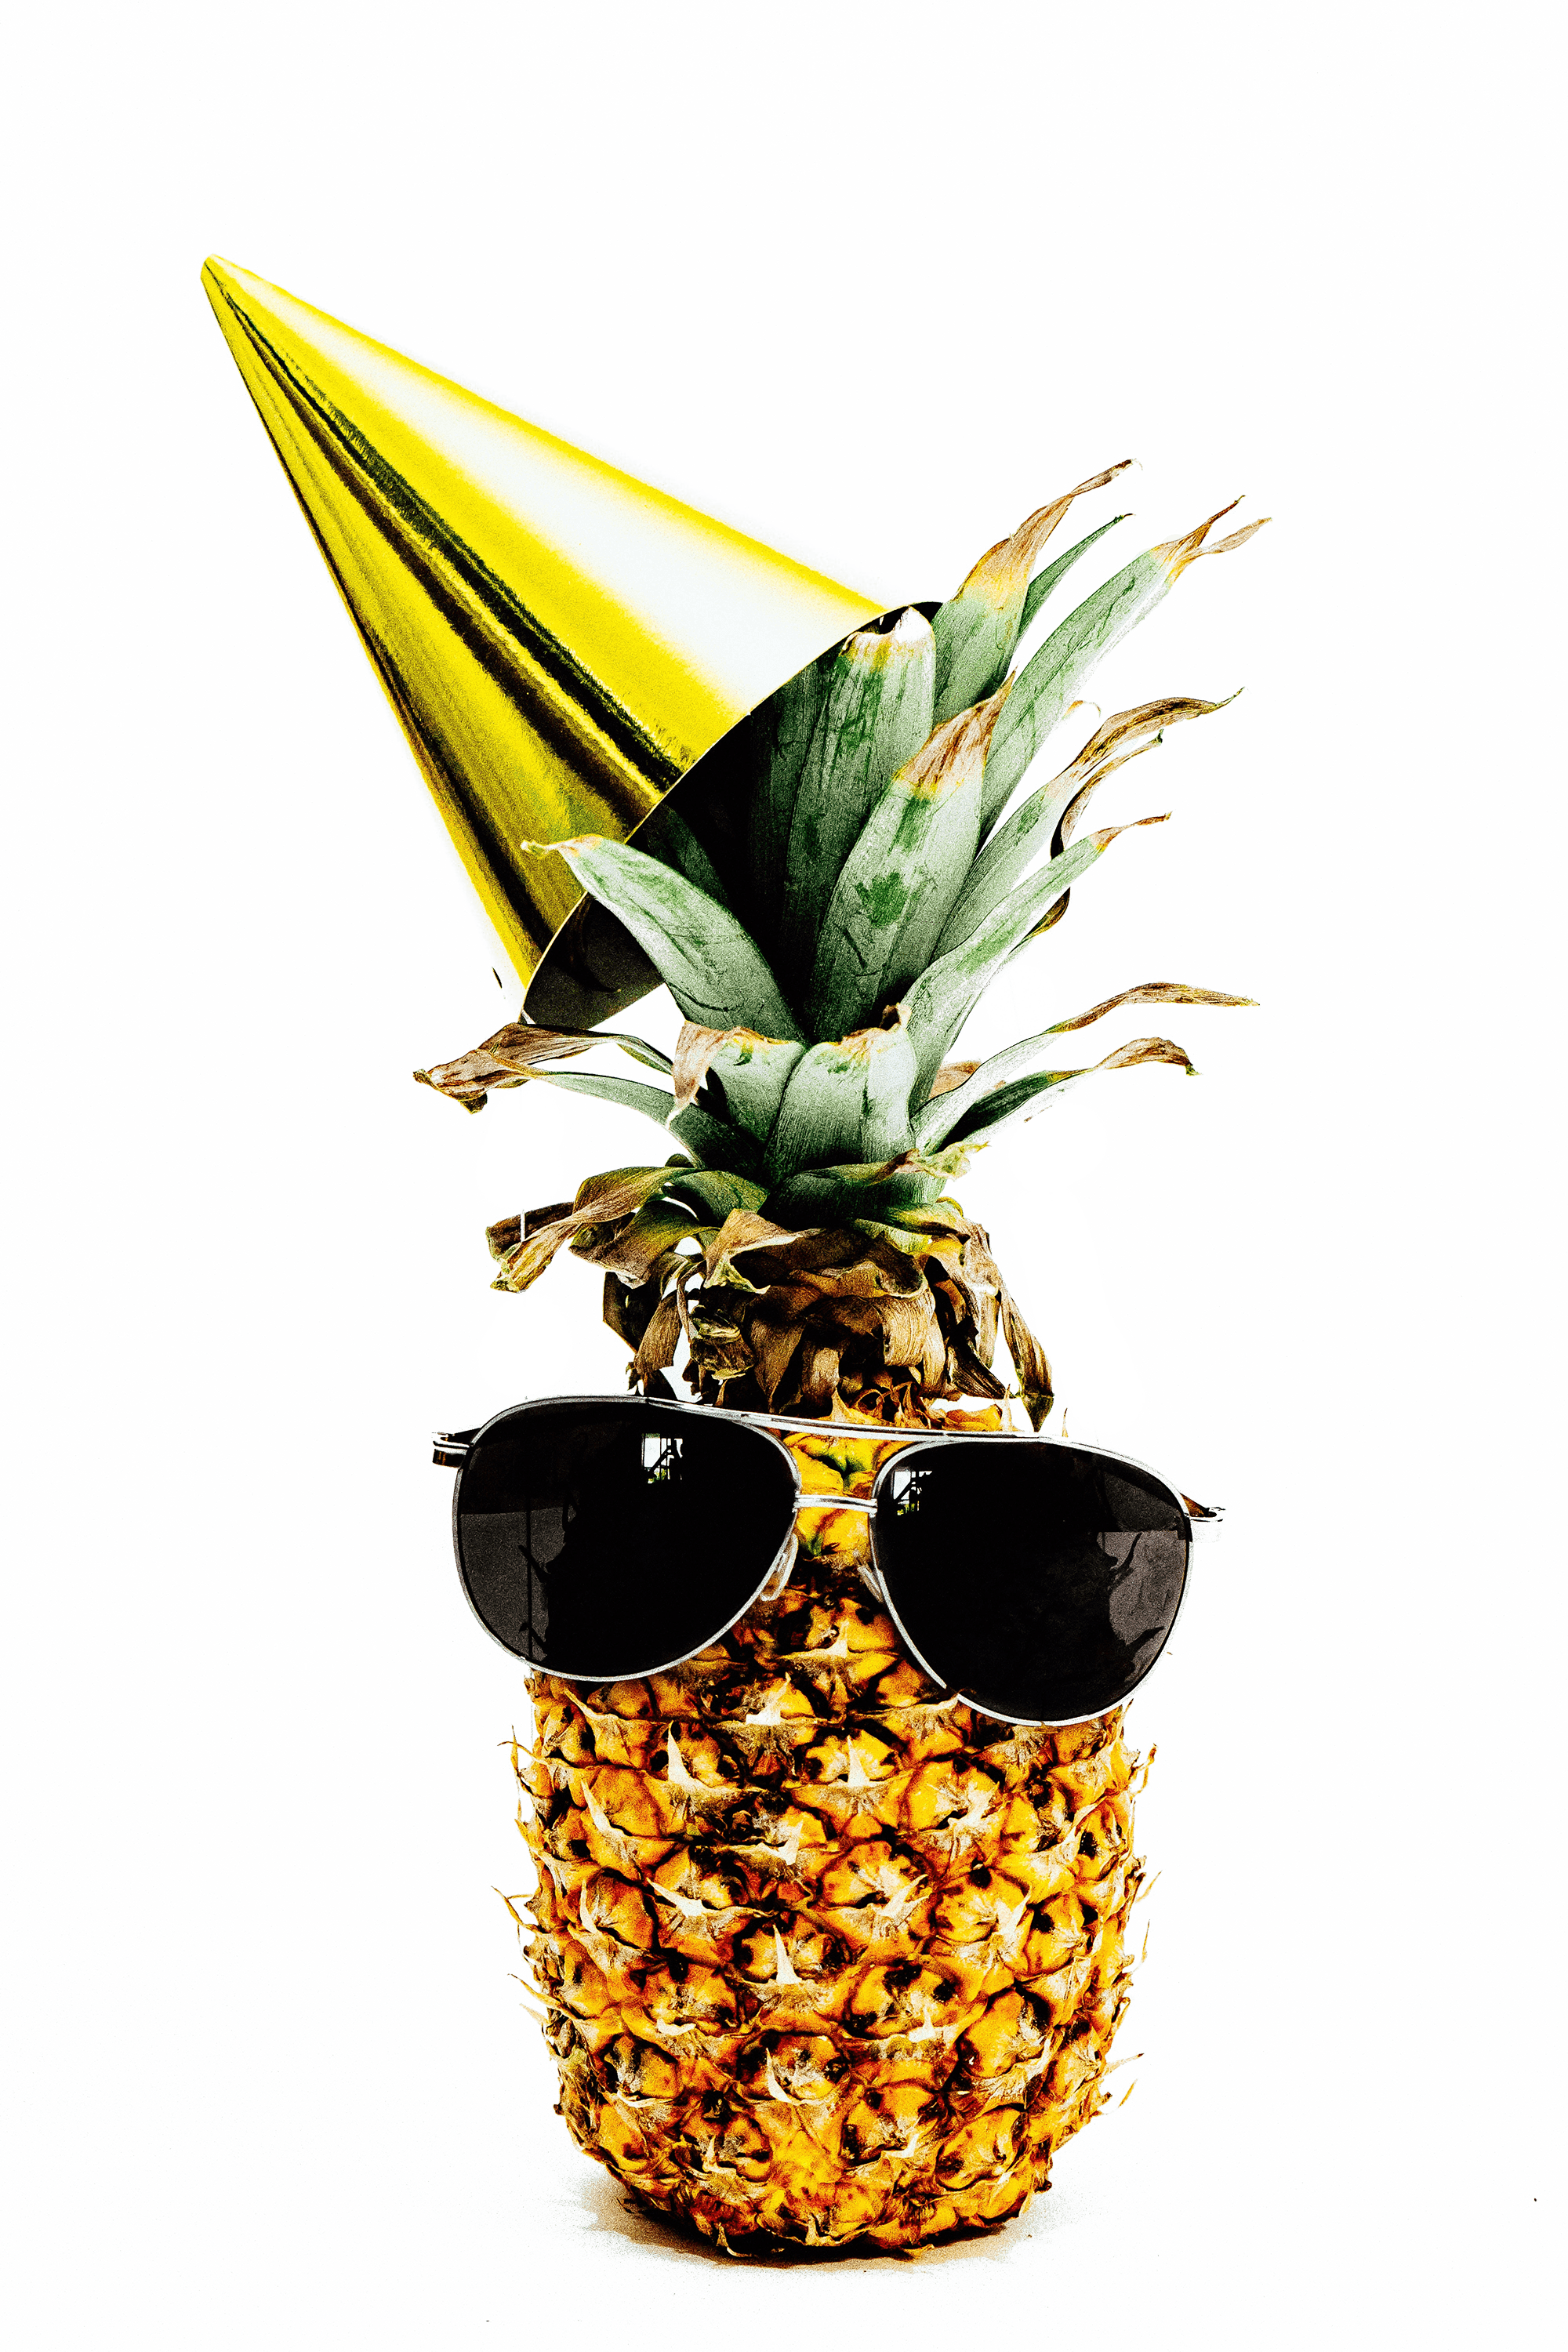 Pineapple wearing sunglasses and a gold party hat.